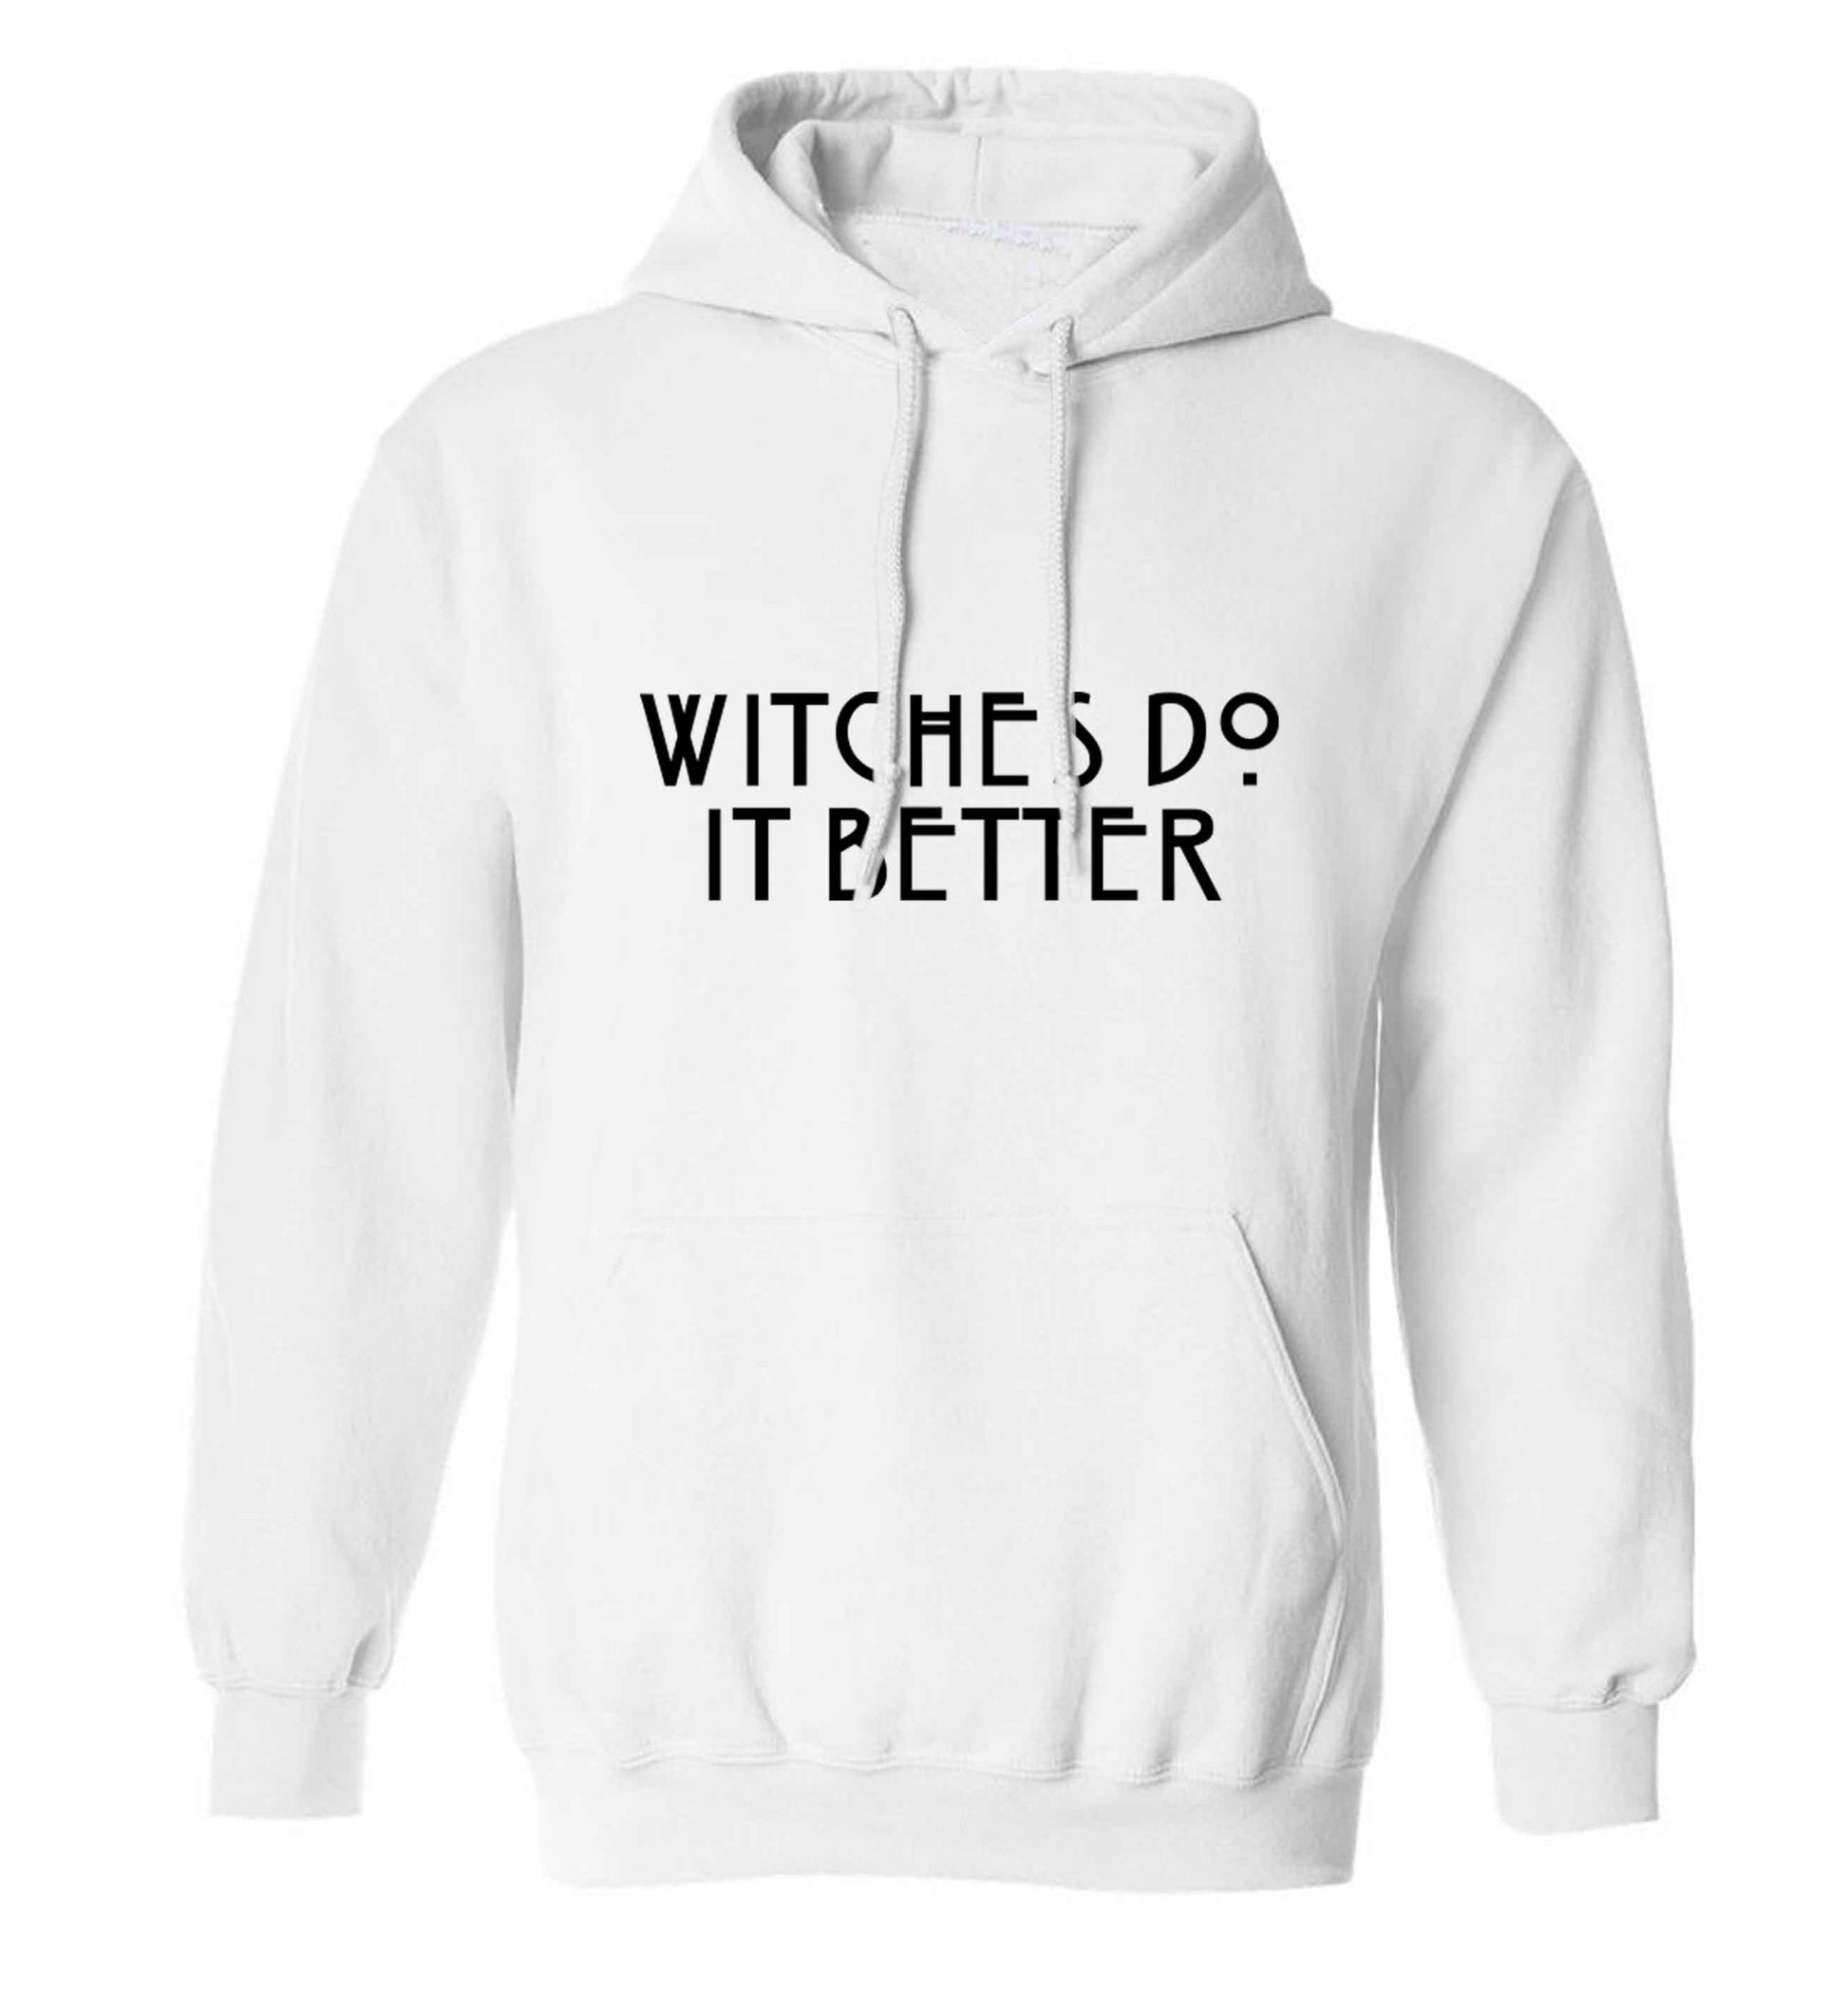 Witches do it better adults unisex white hoodie 2XL